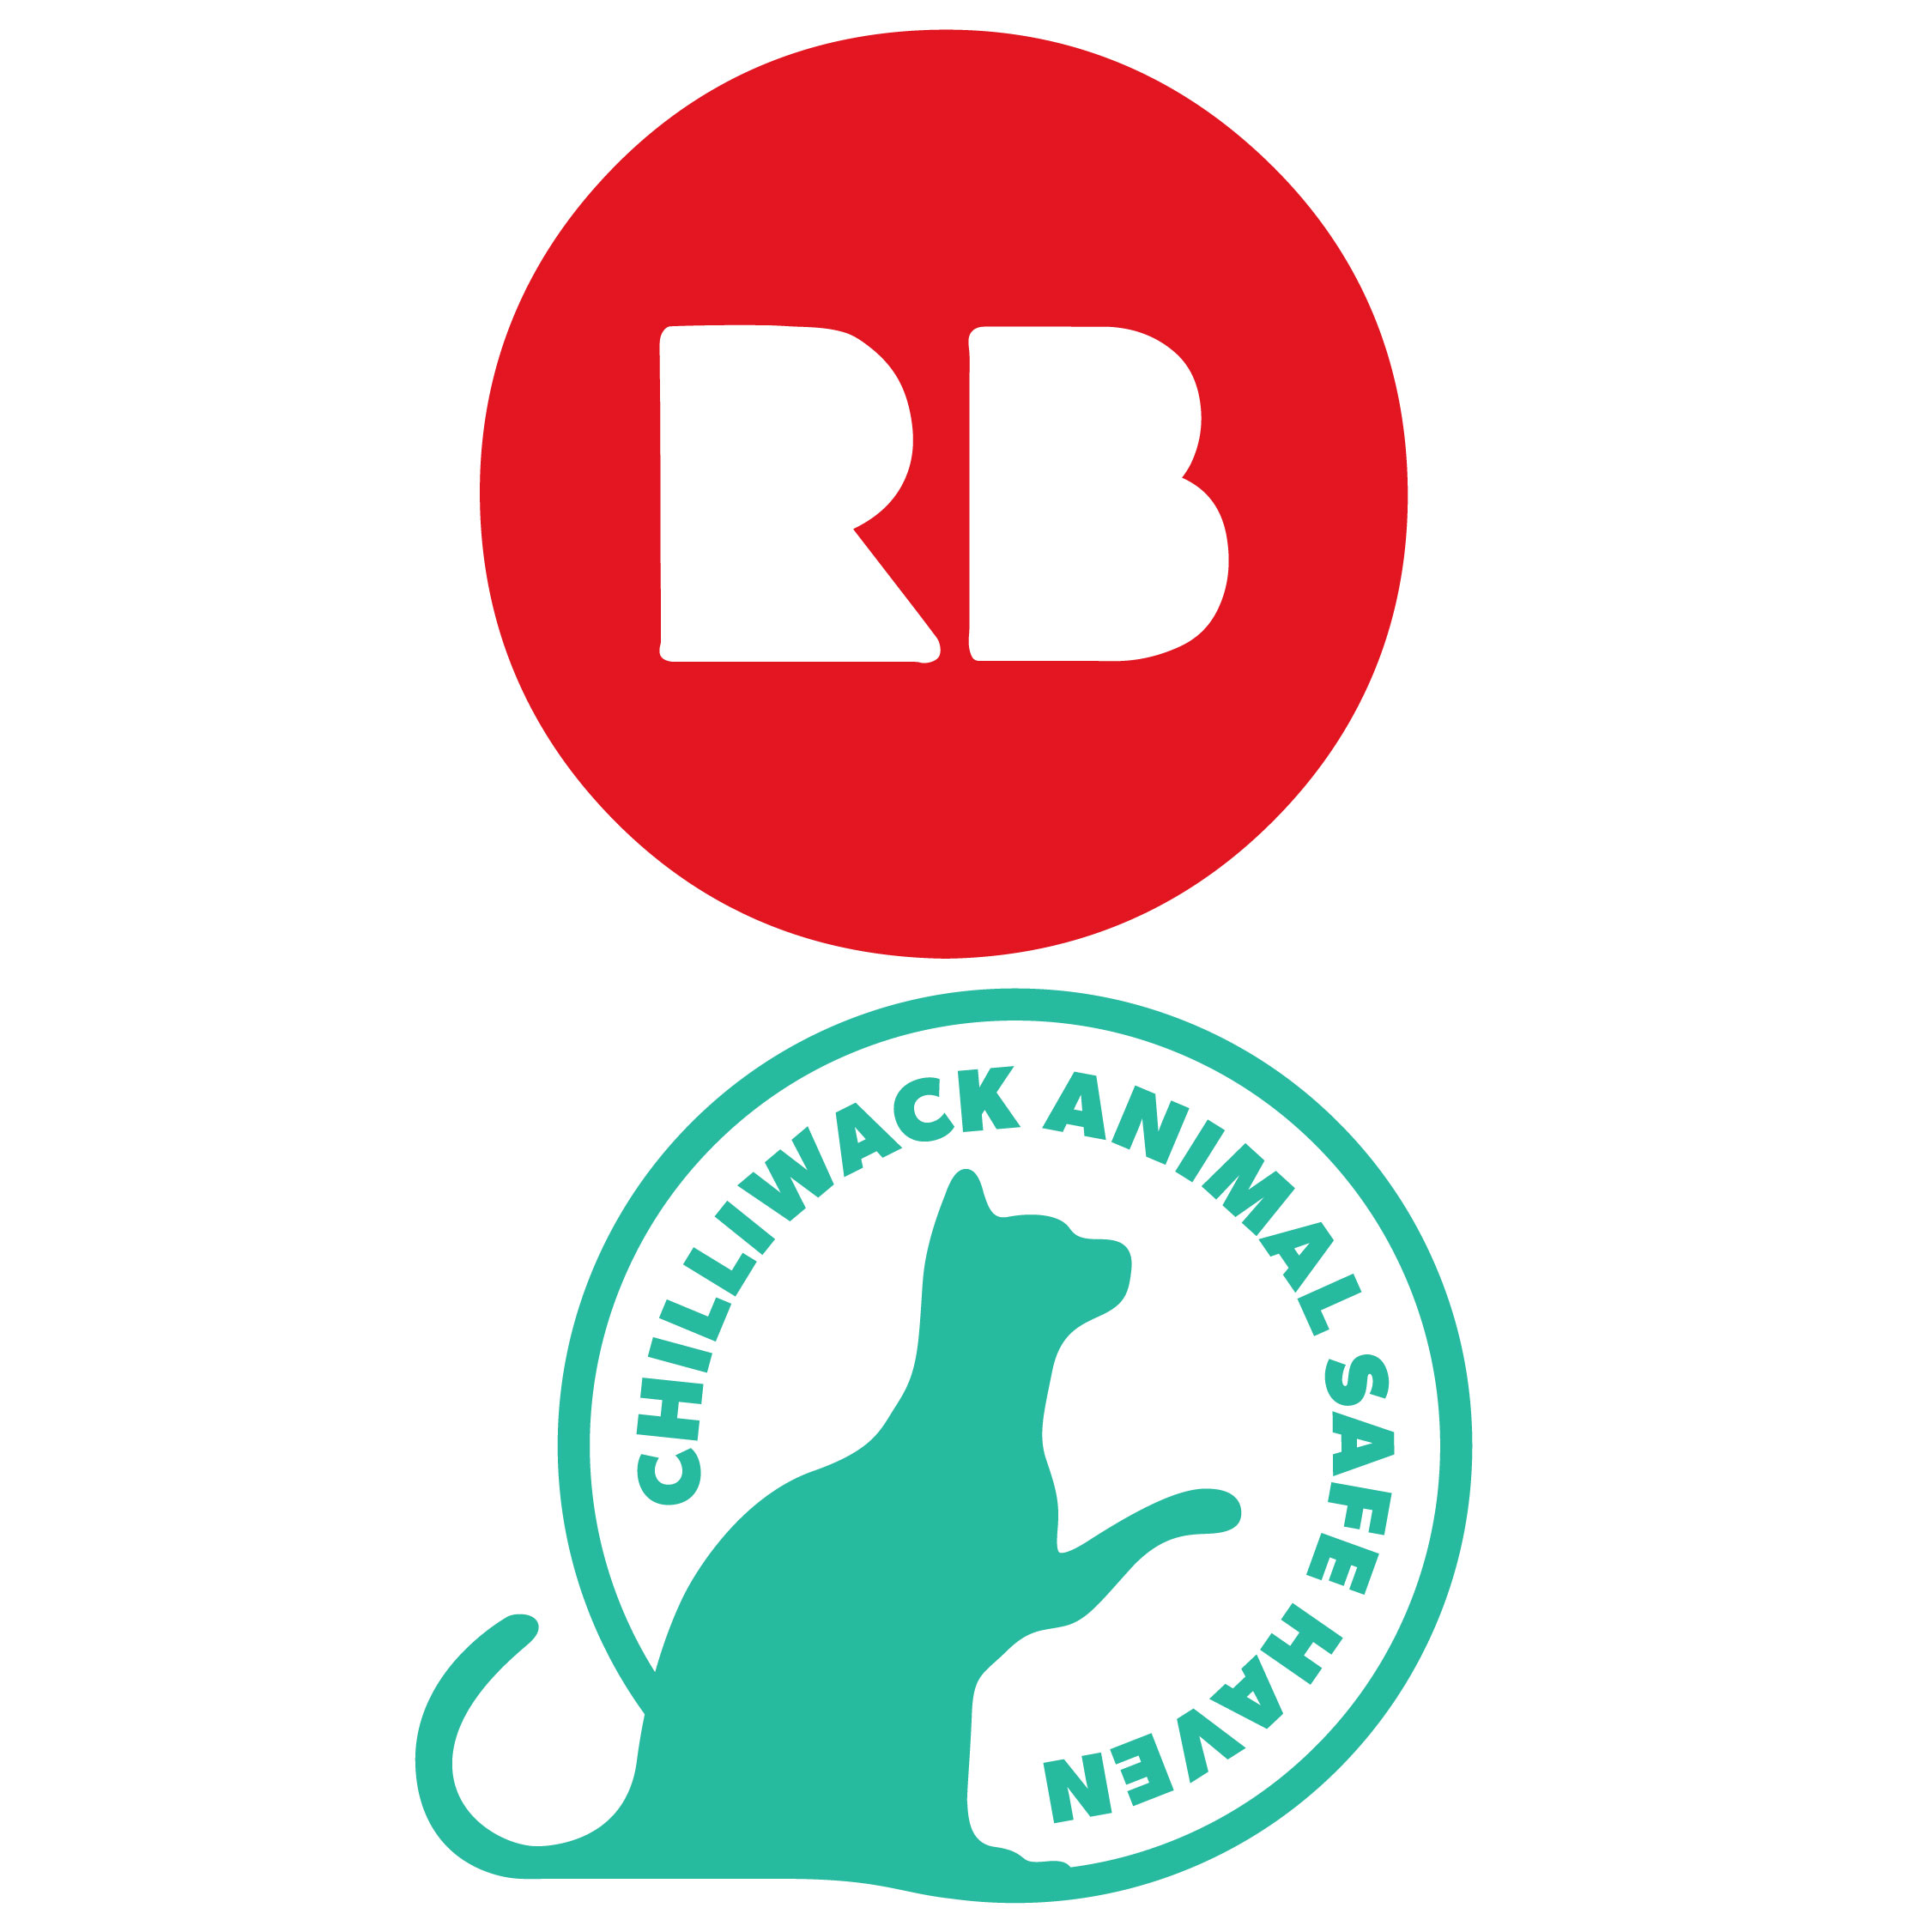 The RedBubble logo which is a red circle, with the R and B cut out in thick block letters, in white. Below that is the teal Chilliwack Animals Safe Haven